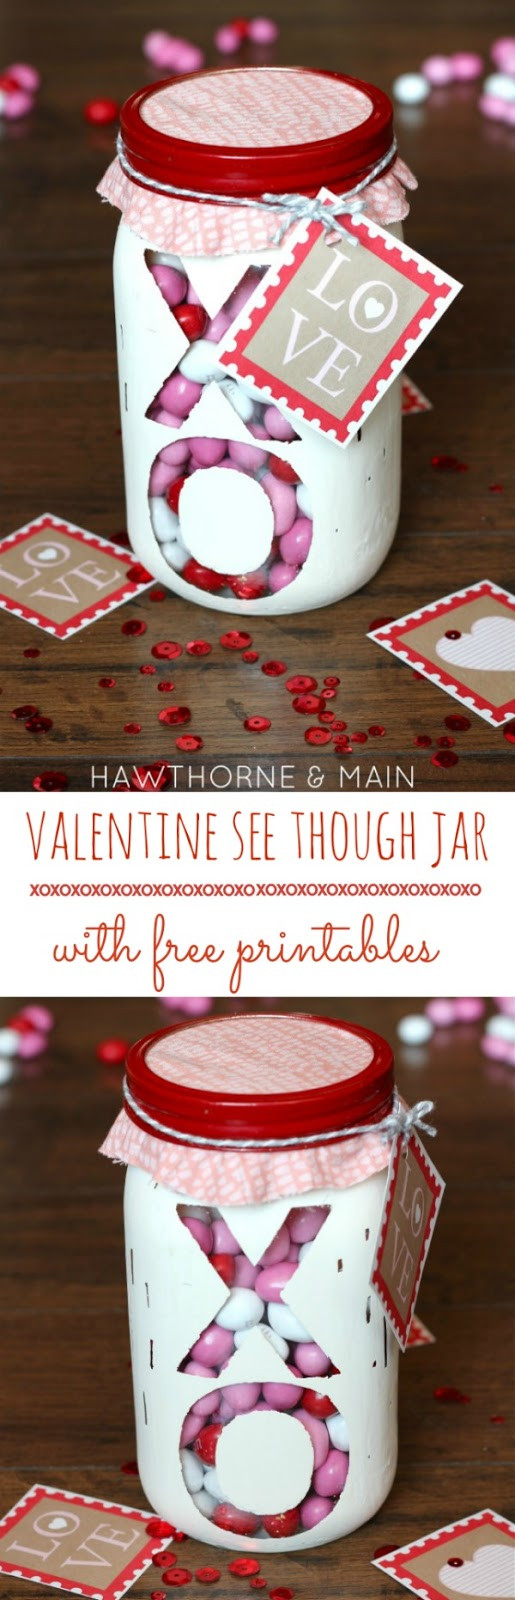 Small Valentine Gift Ideas
 Valentine s Day Mason Jar DIY Project with FREE PRINTABLE